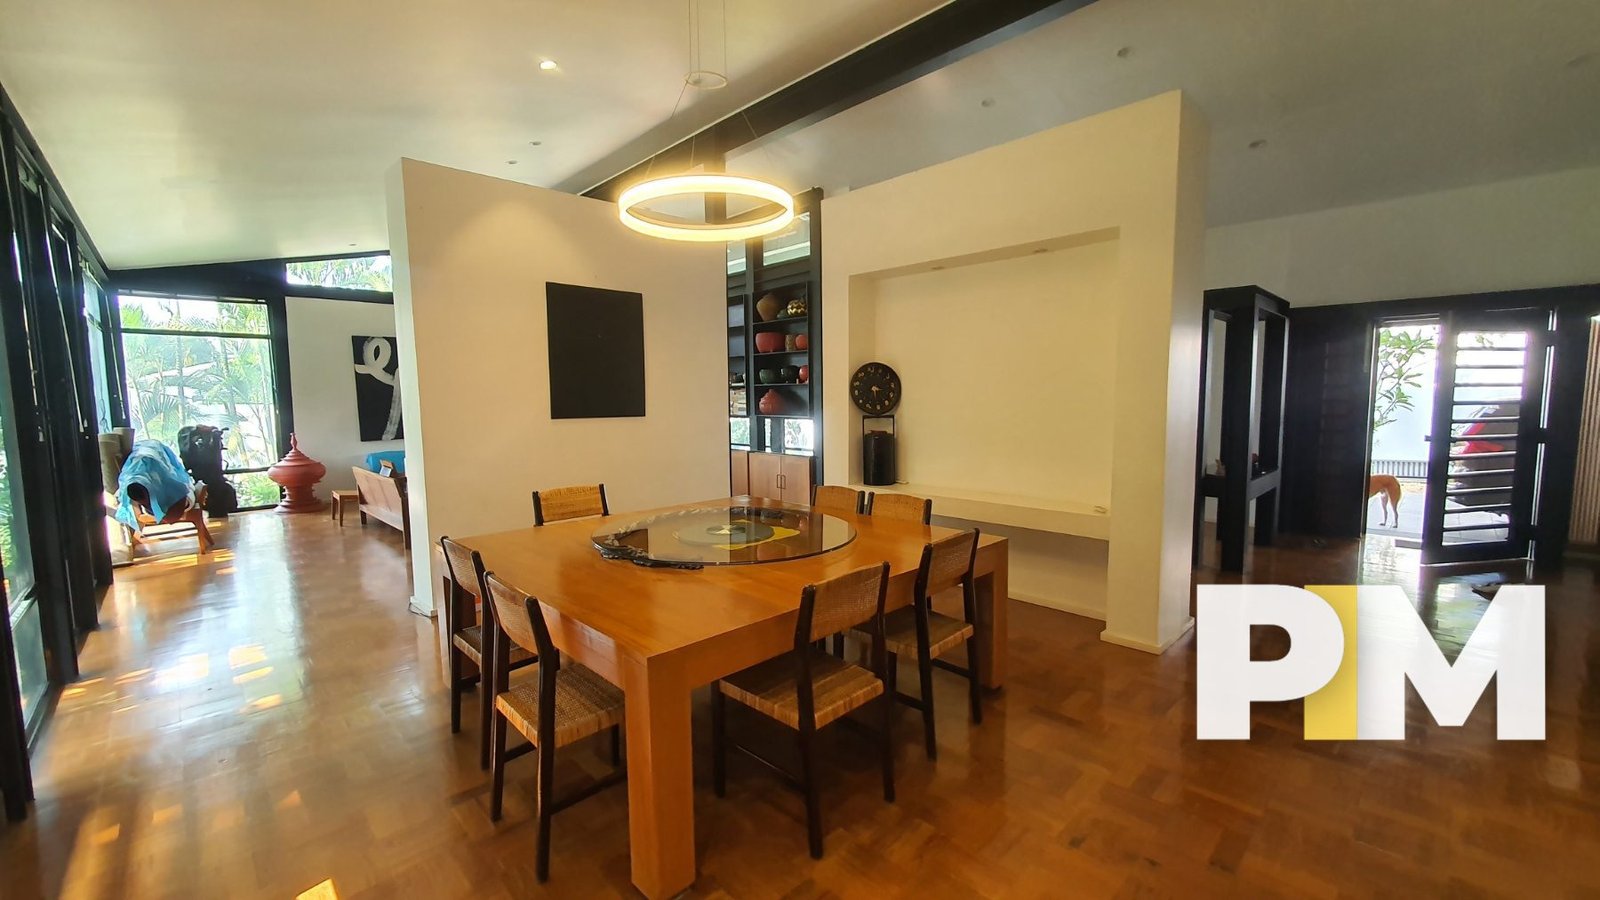 Dining table and chairs - Yangon Real Estate